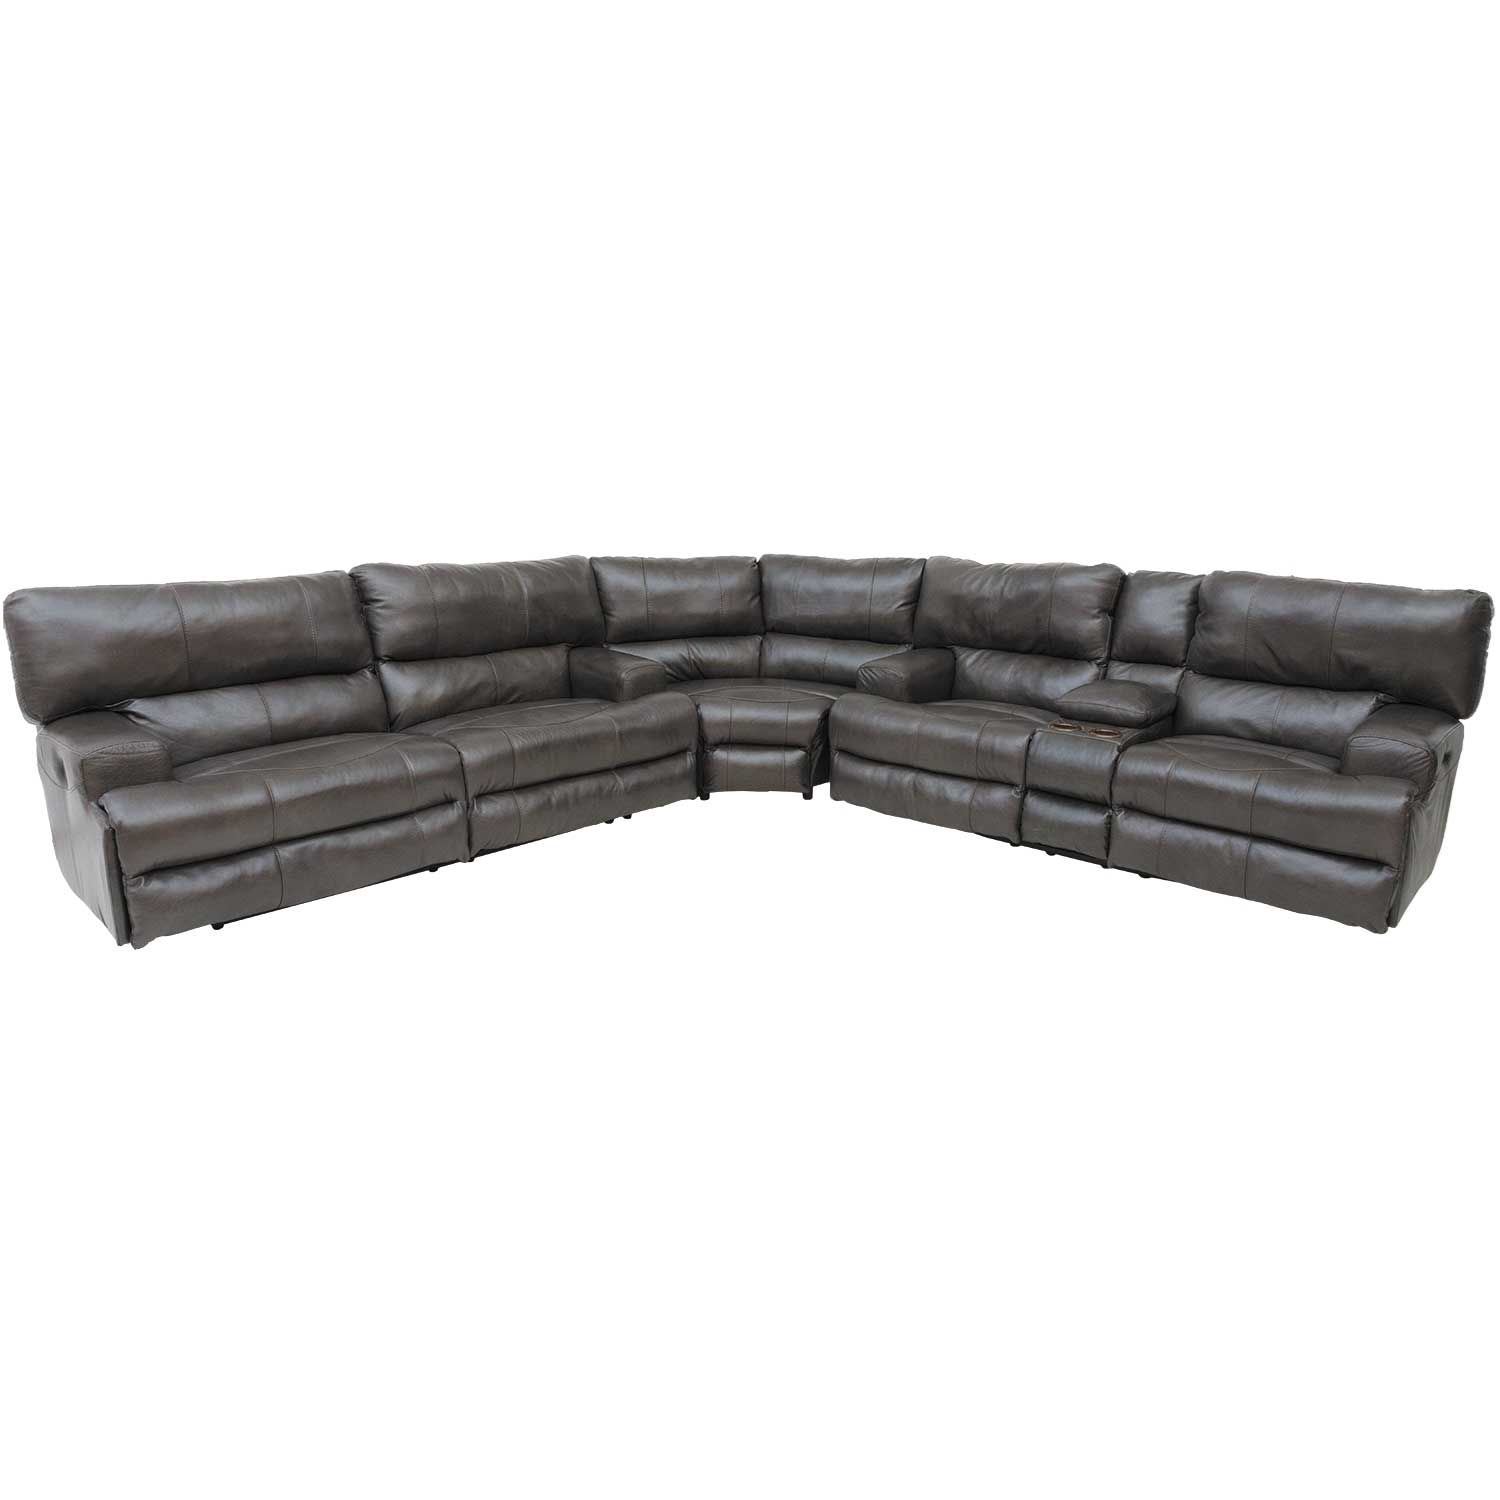 Steel Italian Leather 3pc Recline Sectional 4581 4588 4589